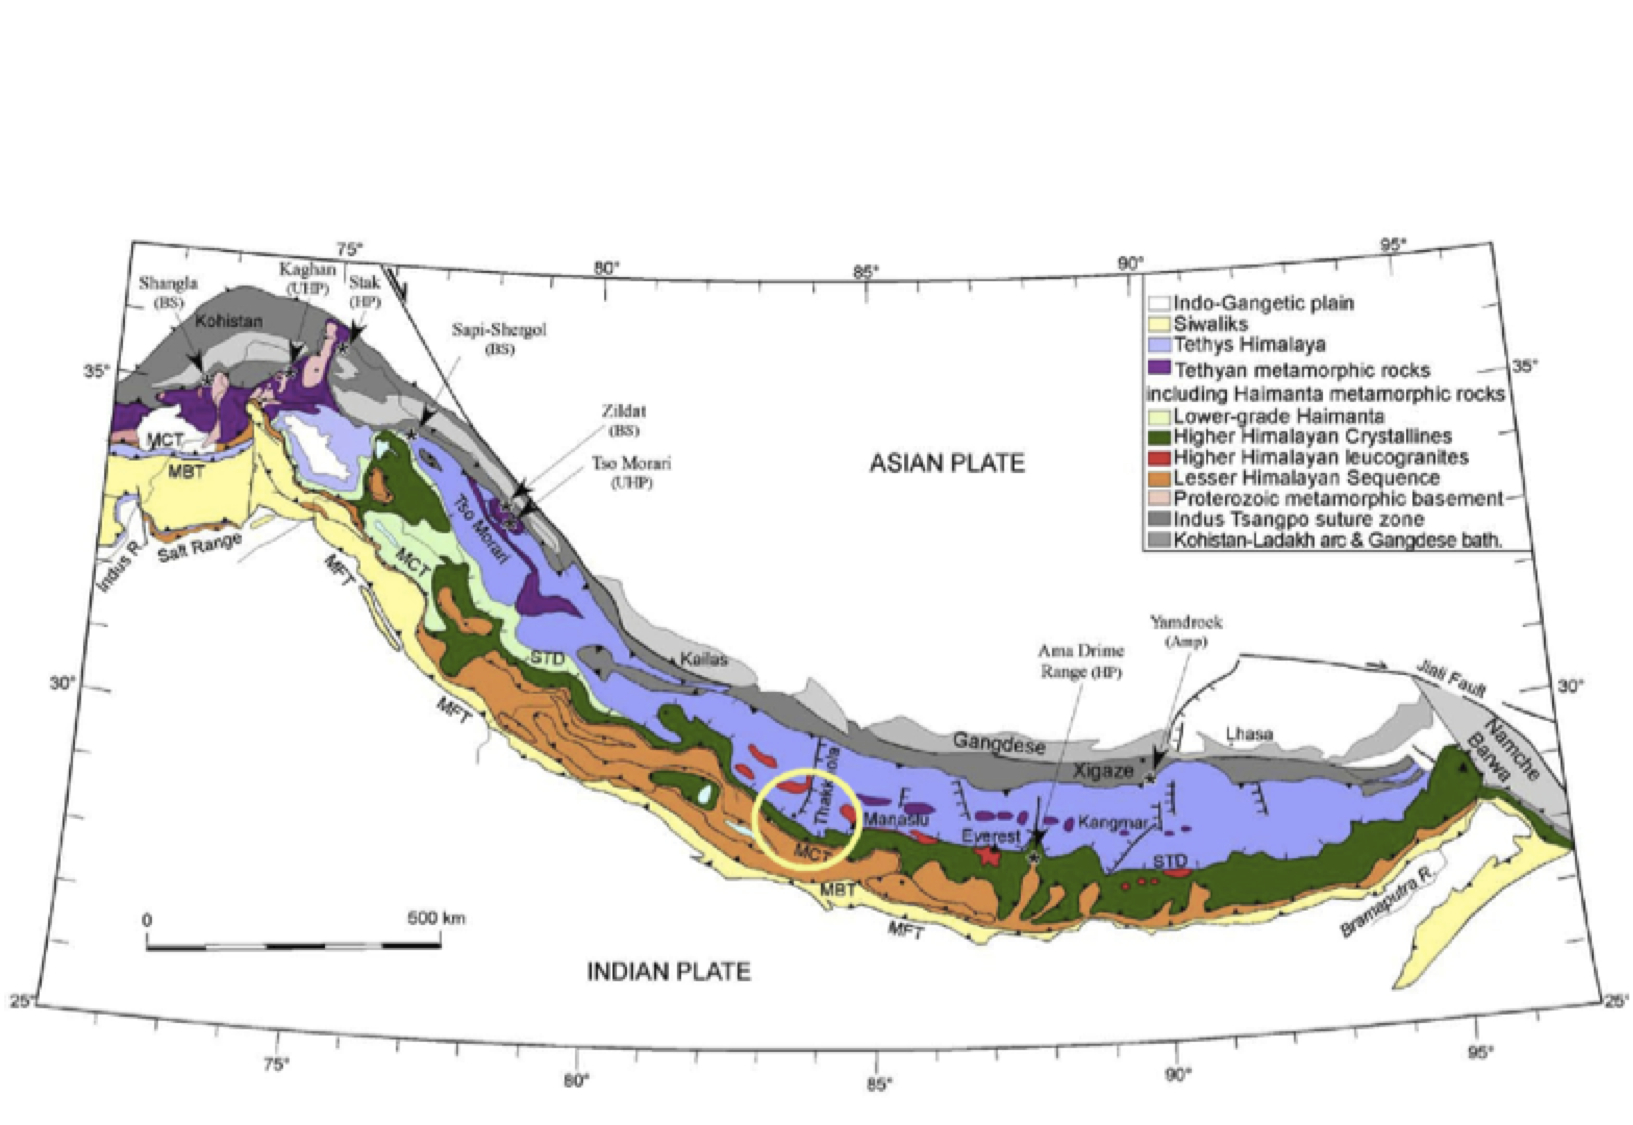 Geological sketch map of the Himalayas